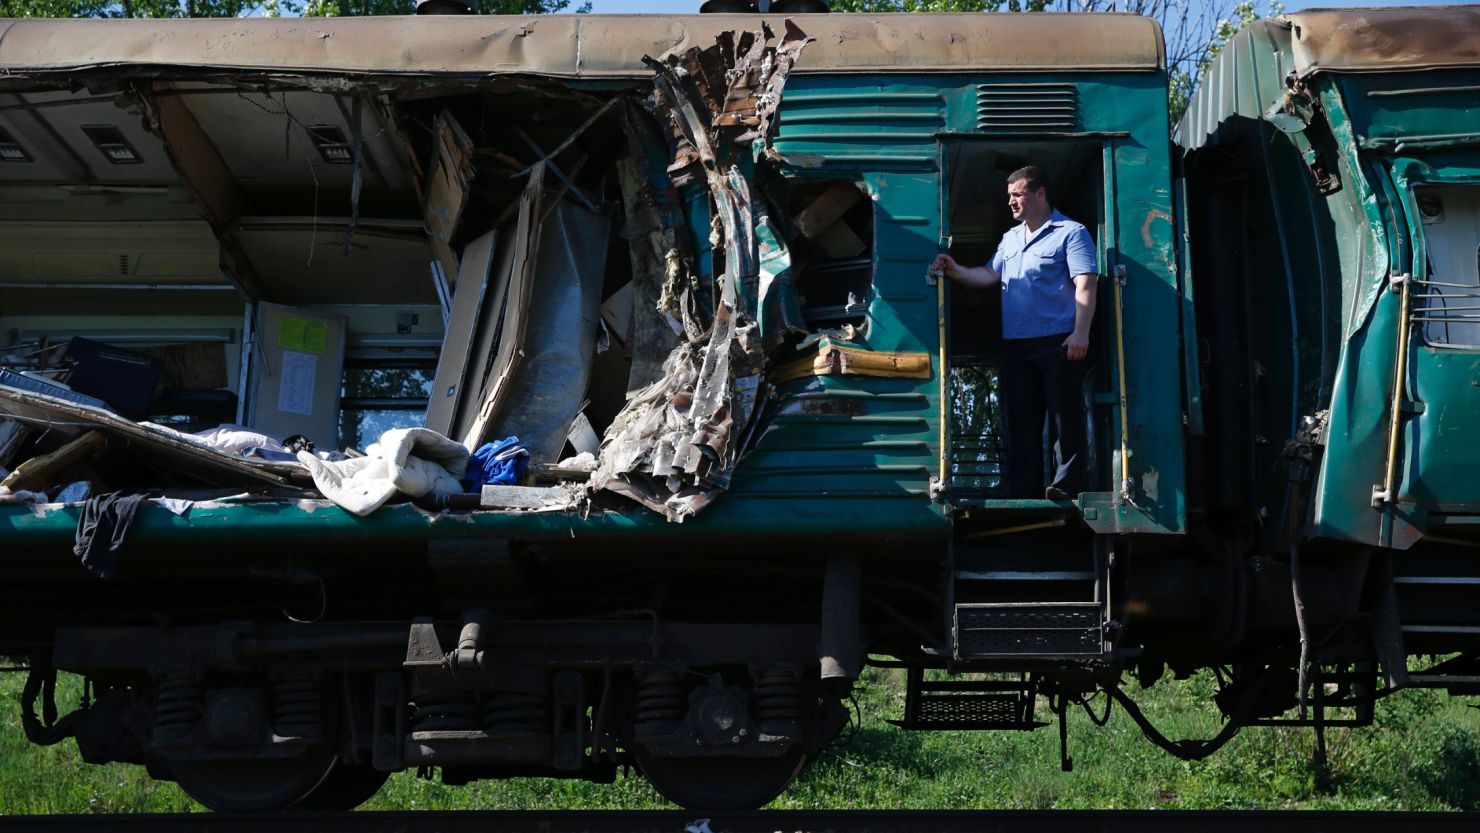 A damaged railway car at the site of train collision near the city of Naro-Fominsk on May 20, 2014. 